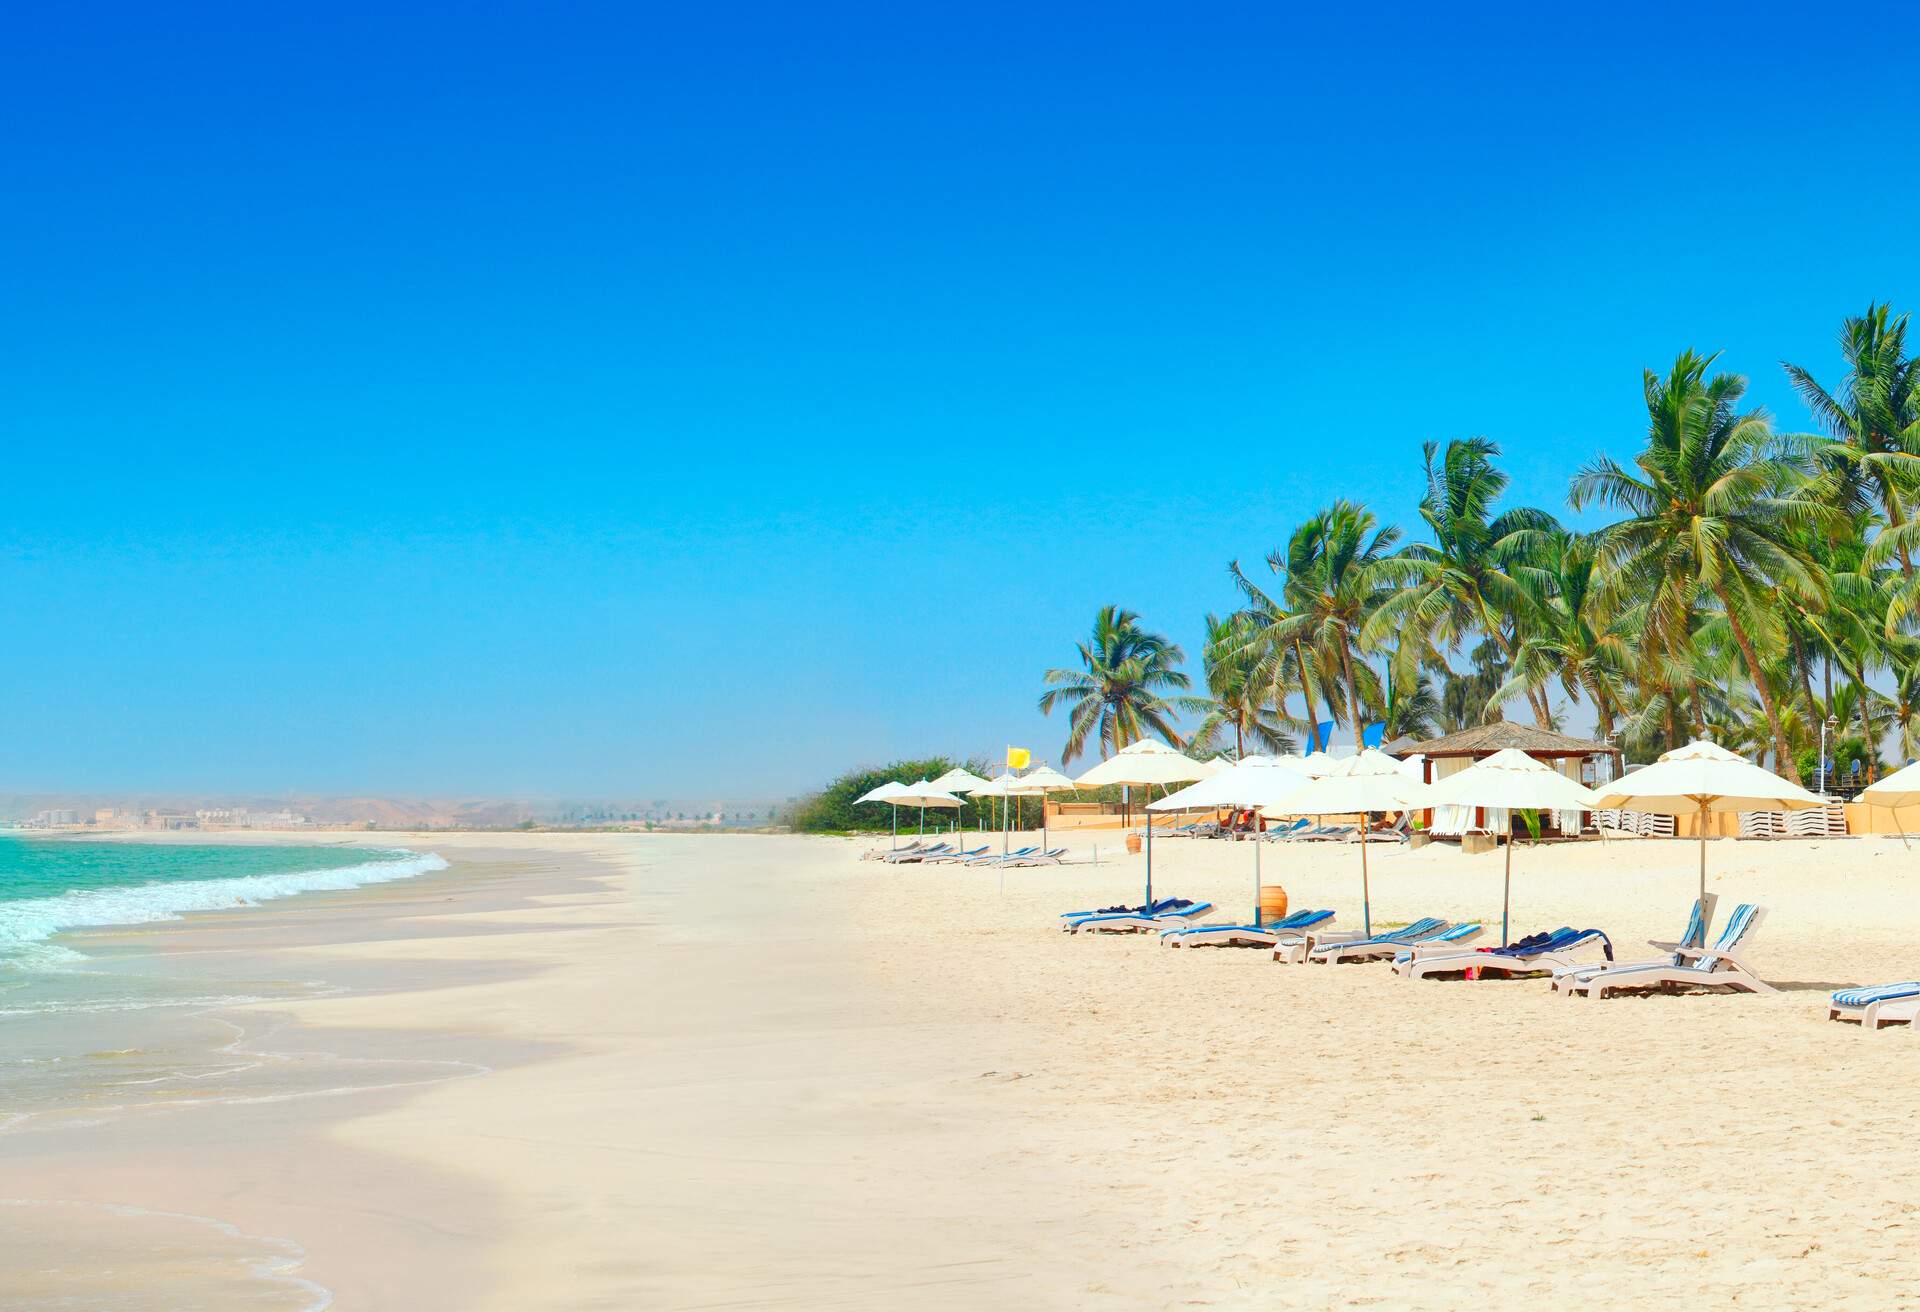 Sunny beach with palm trees and sunbeds in Salalah Oman